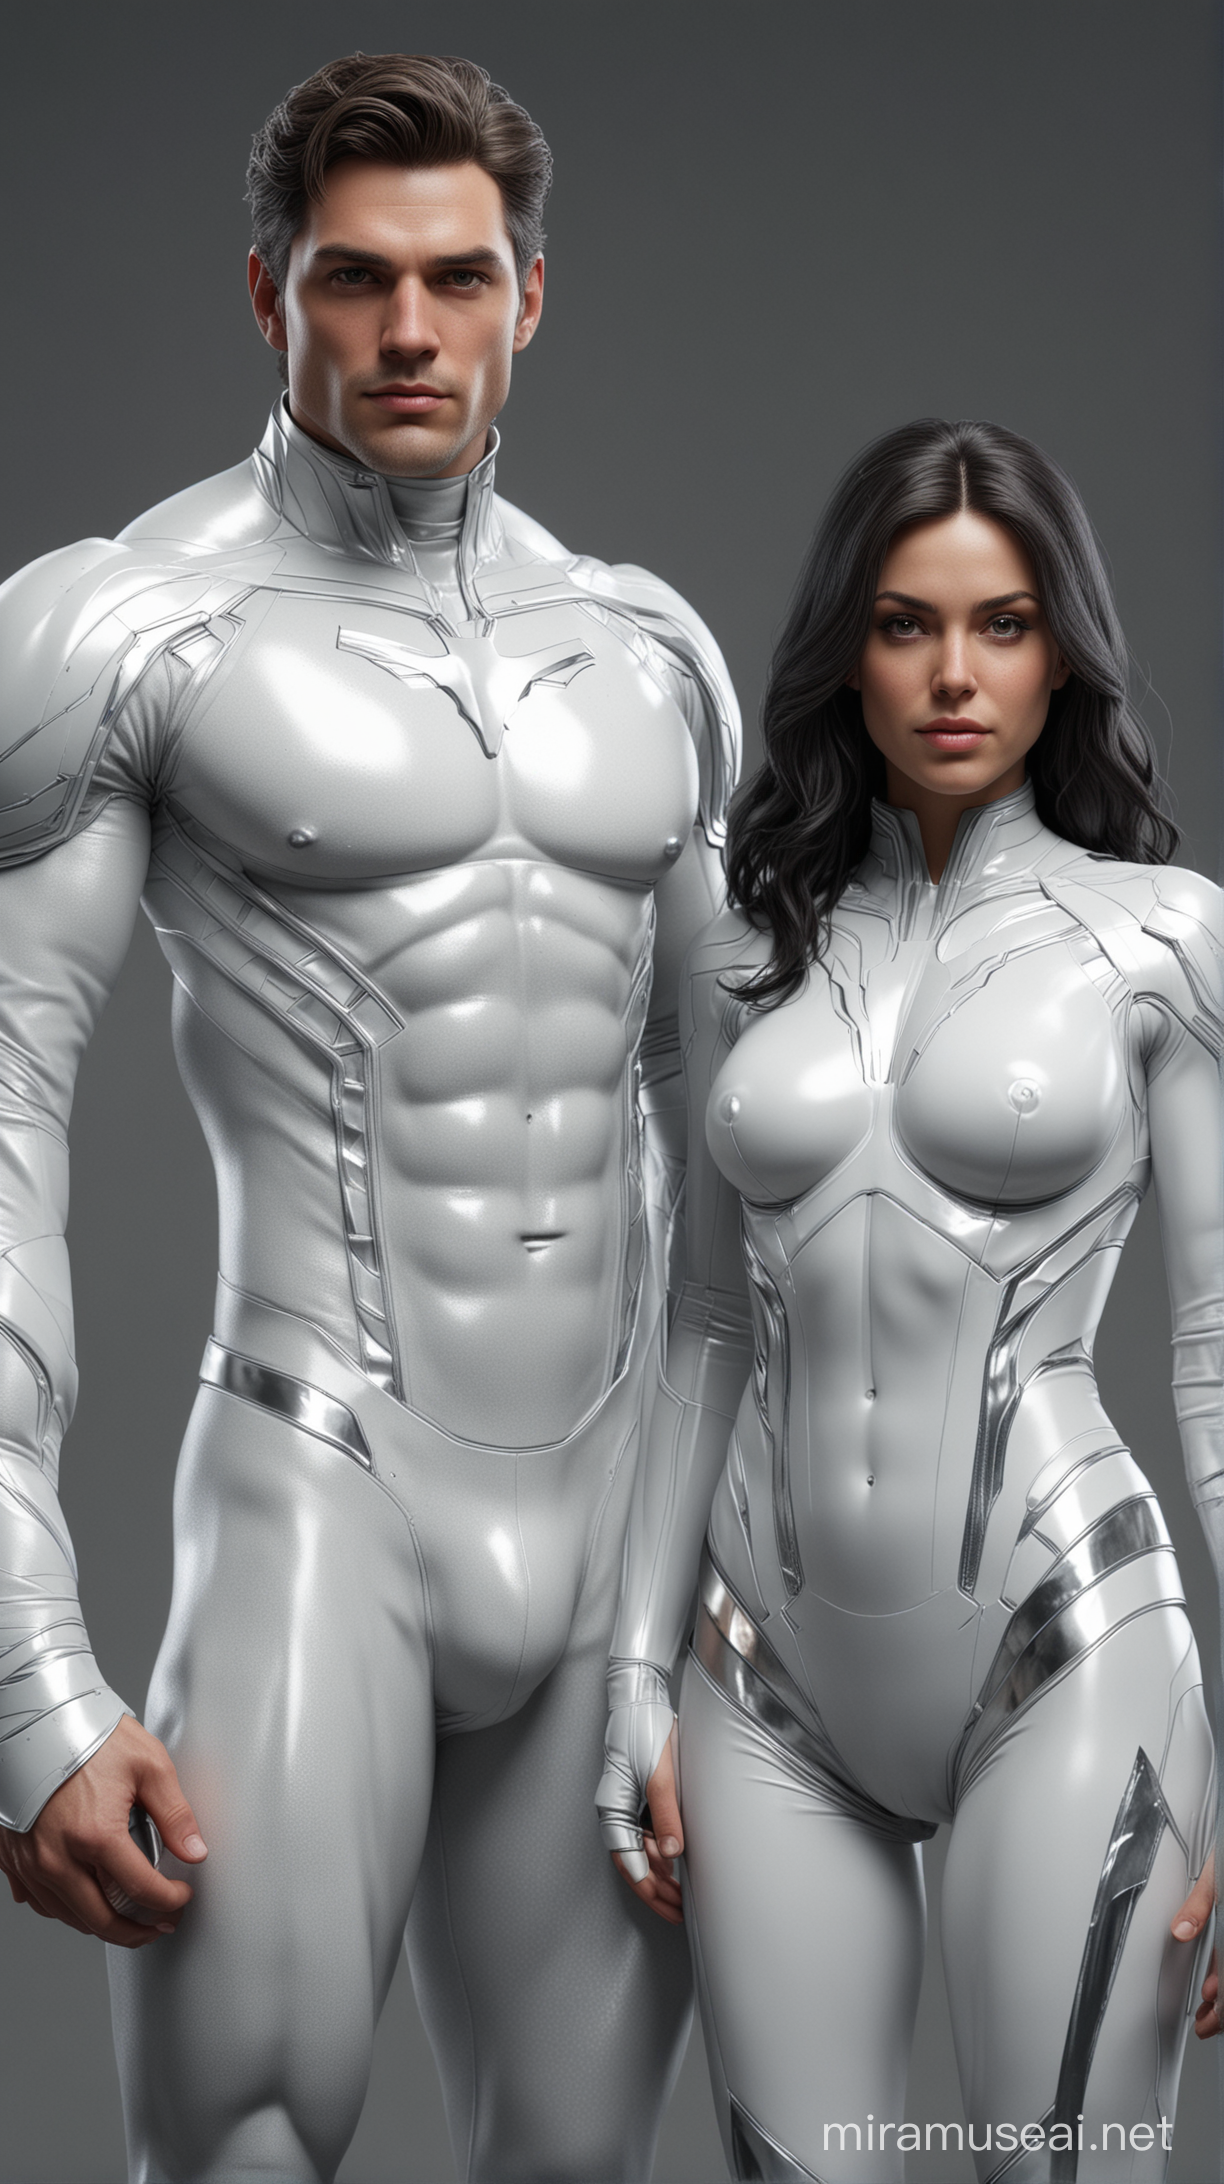 Elegant Couple Conner Kent and Donna Troy in White and Silver Symmetrical Asymmetry Portrait